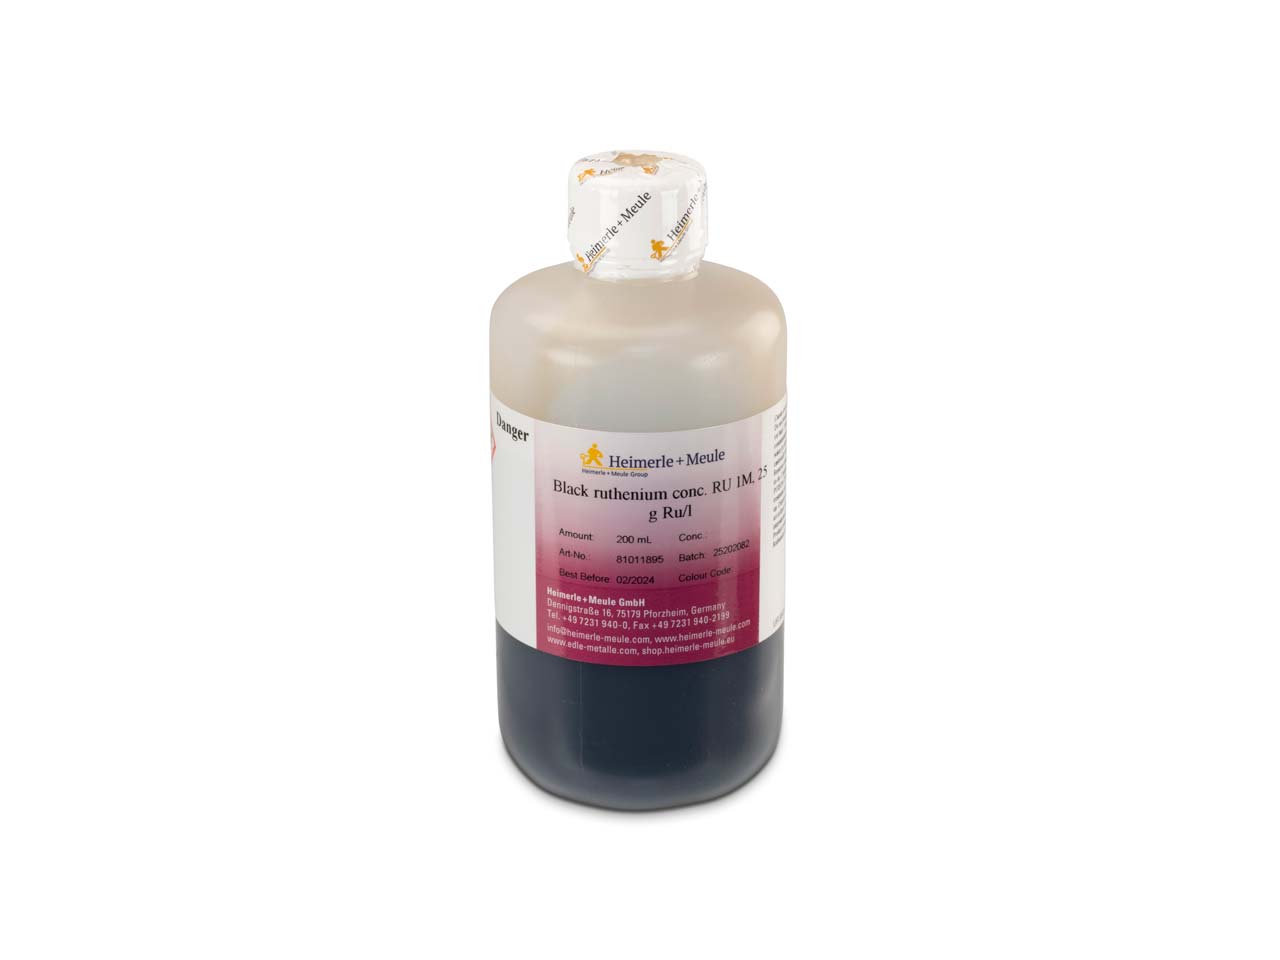 Do you have a safety data sheet for Black Ruthenium Plating Solution Concentrate 200ml 5g Ru/200ml Un2796?